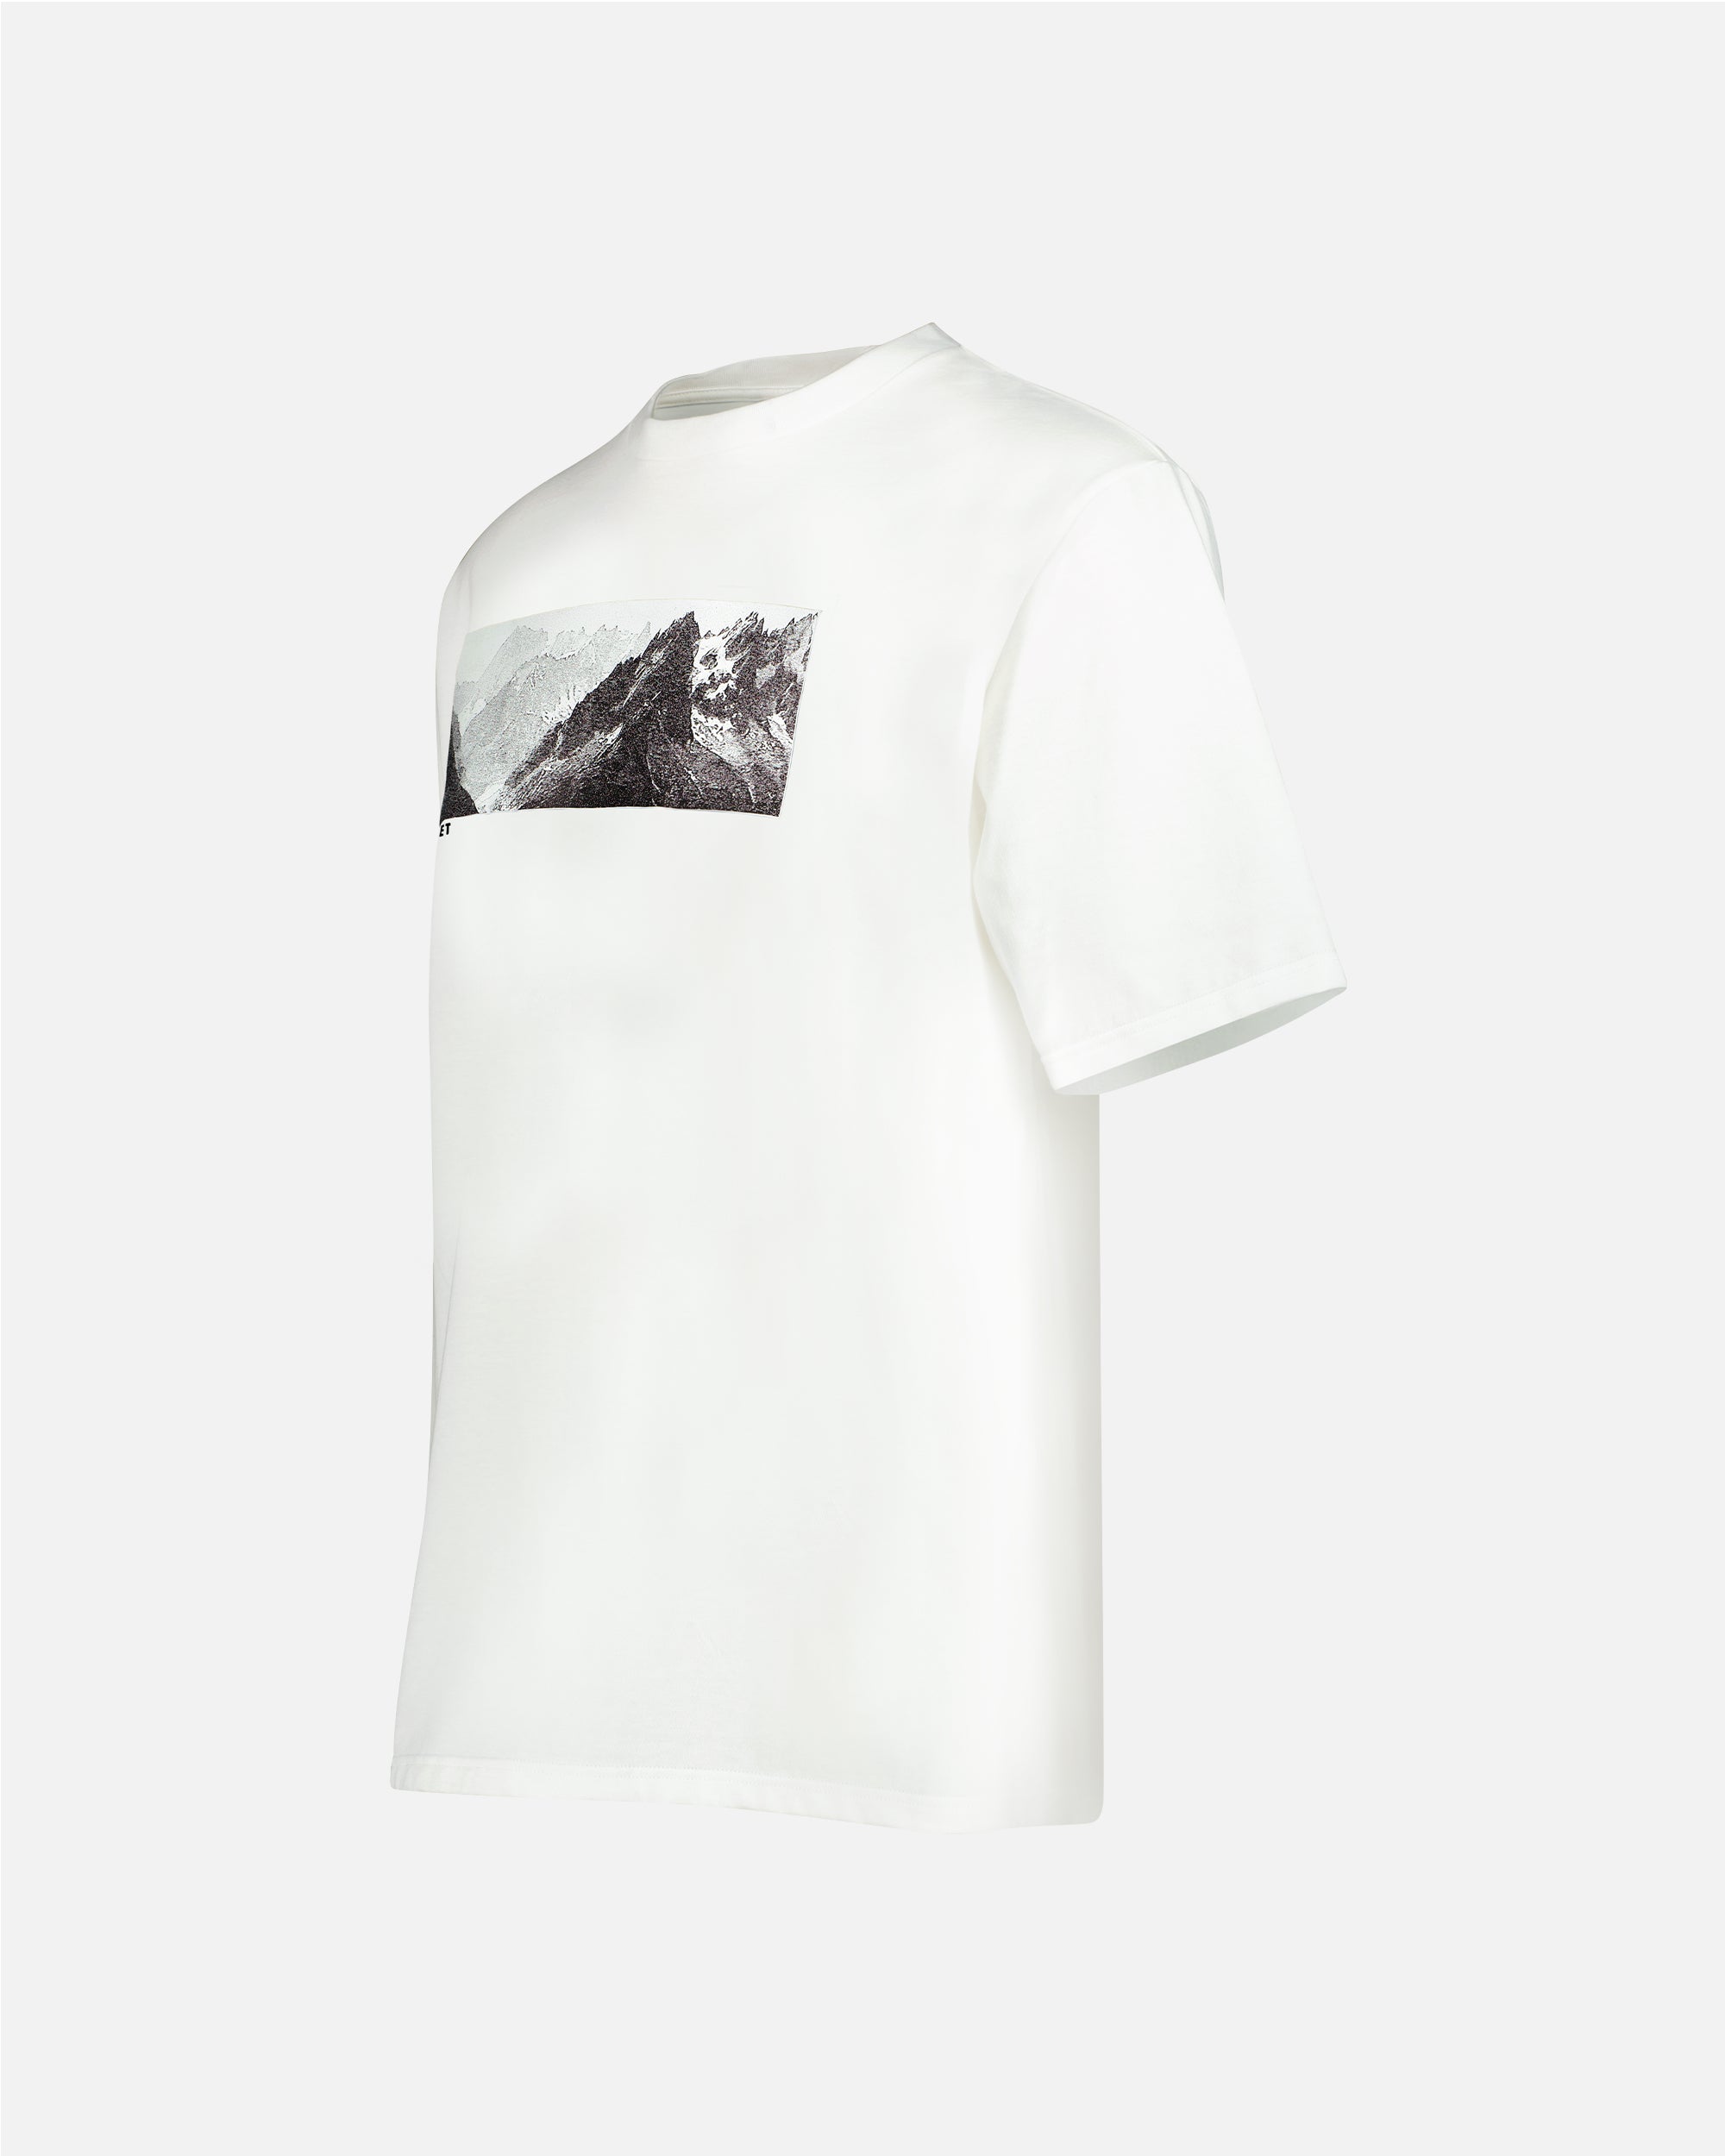 IN THE MOUNTAIN PRINTED T-SHIRT WHITE